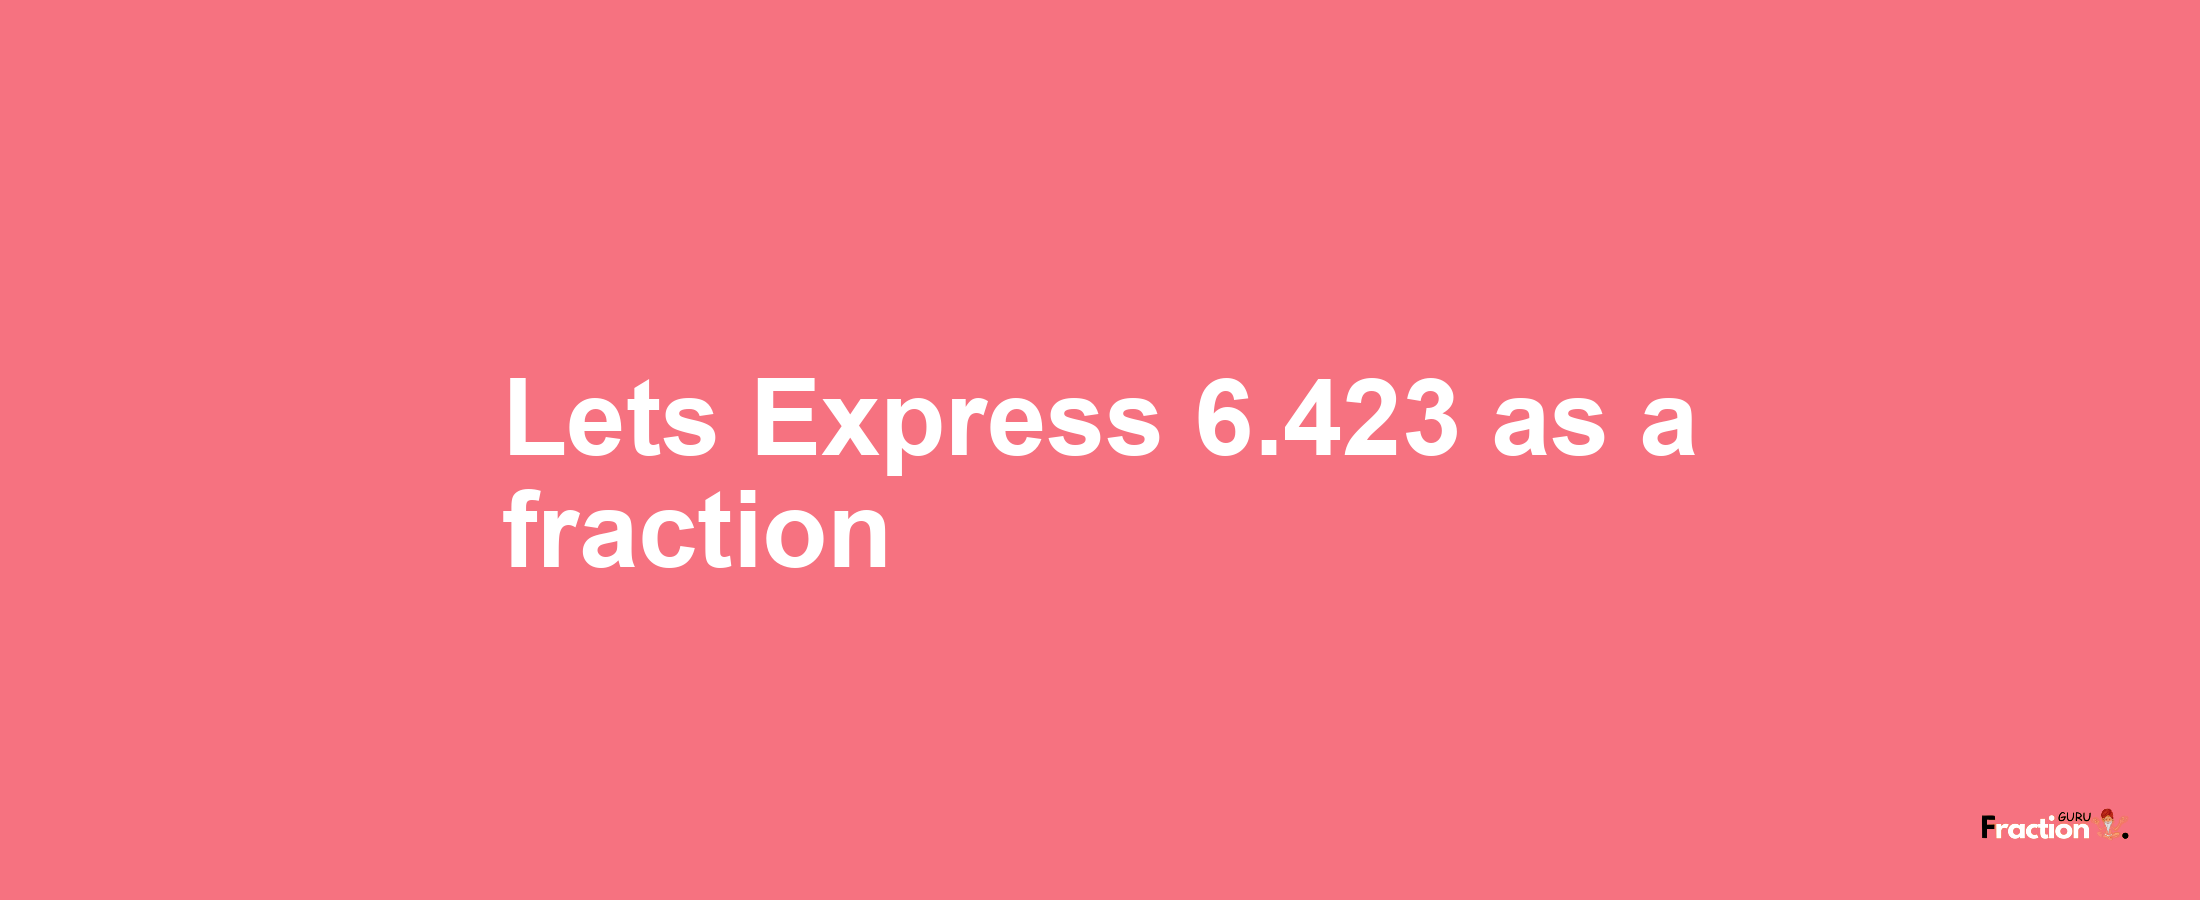 Lets Express 6.423 as afraction